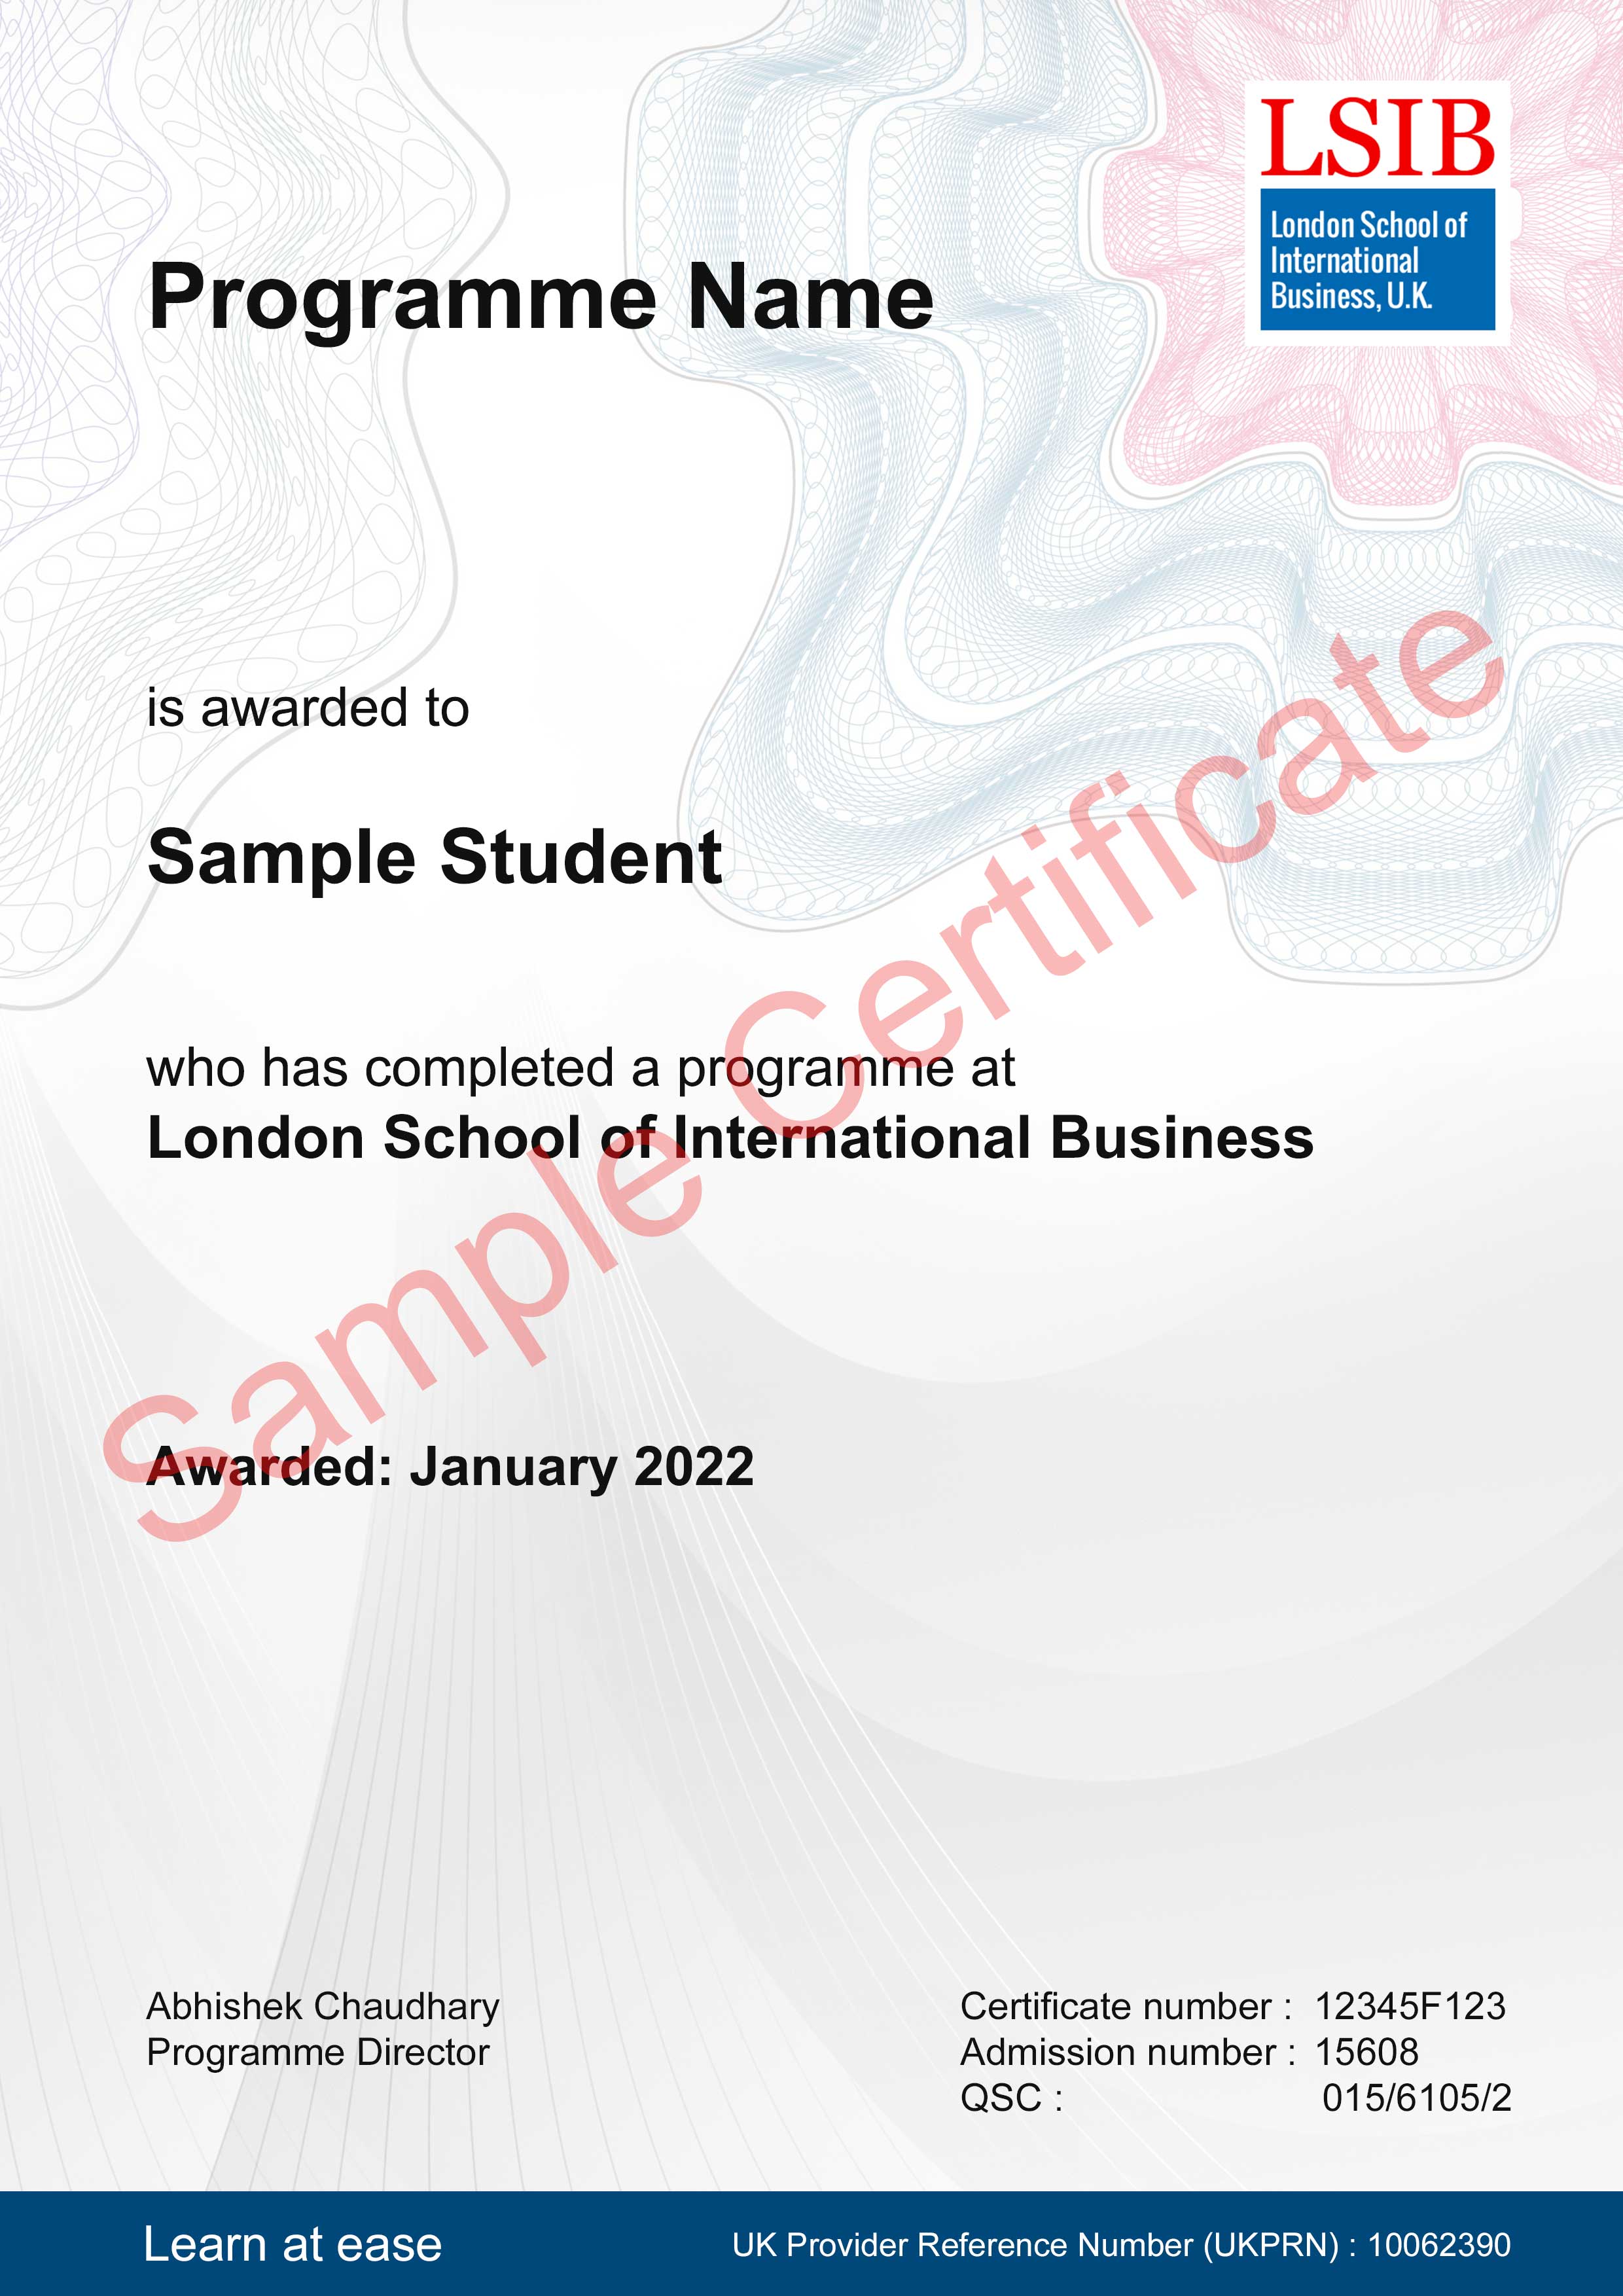 Level 4 Diploma in Business Management